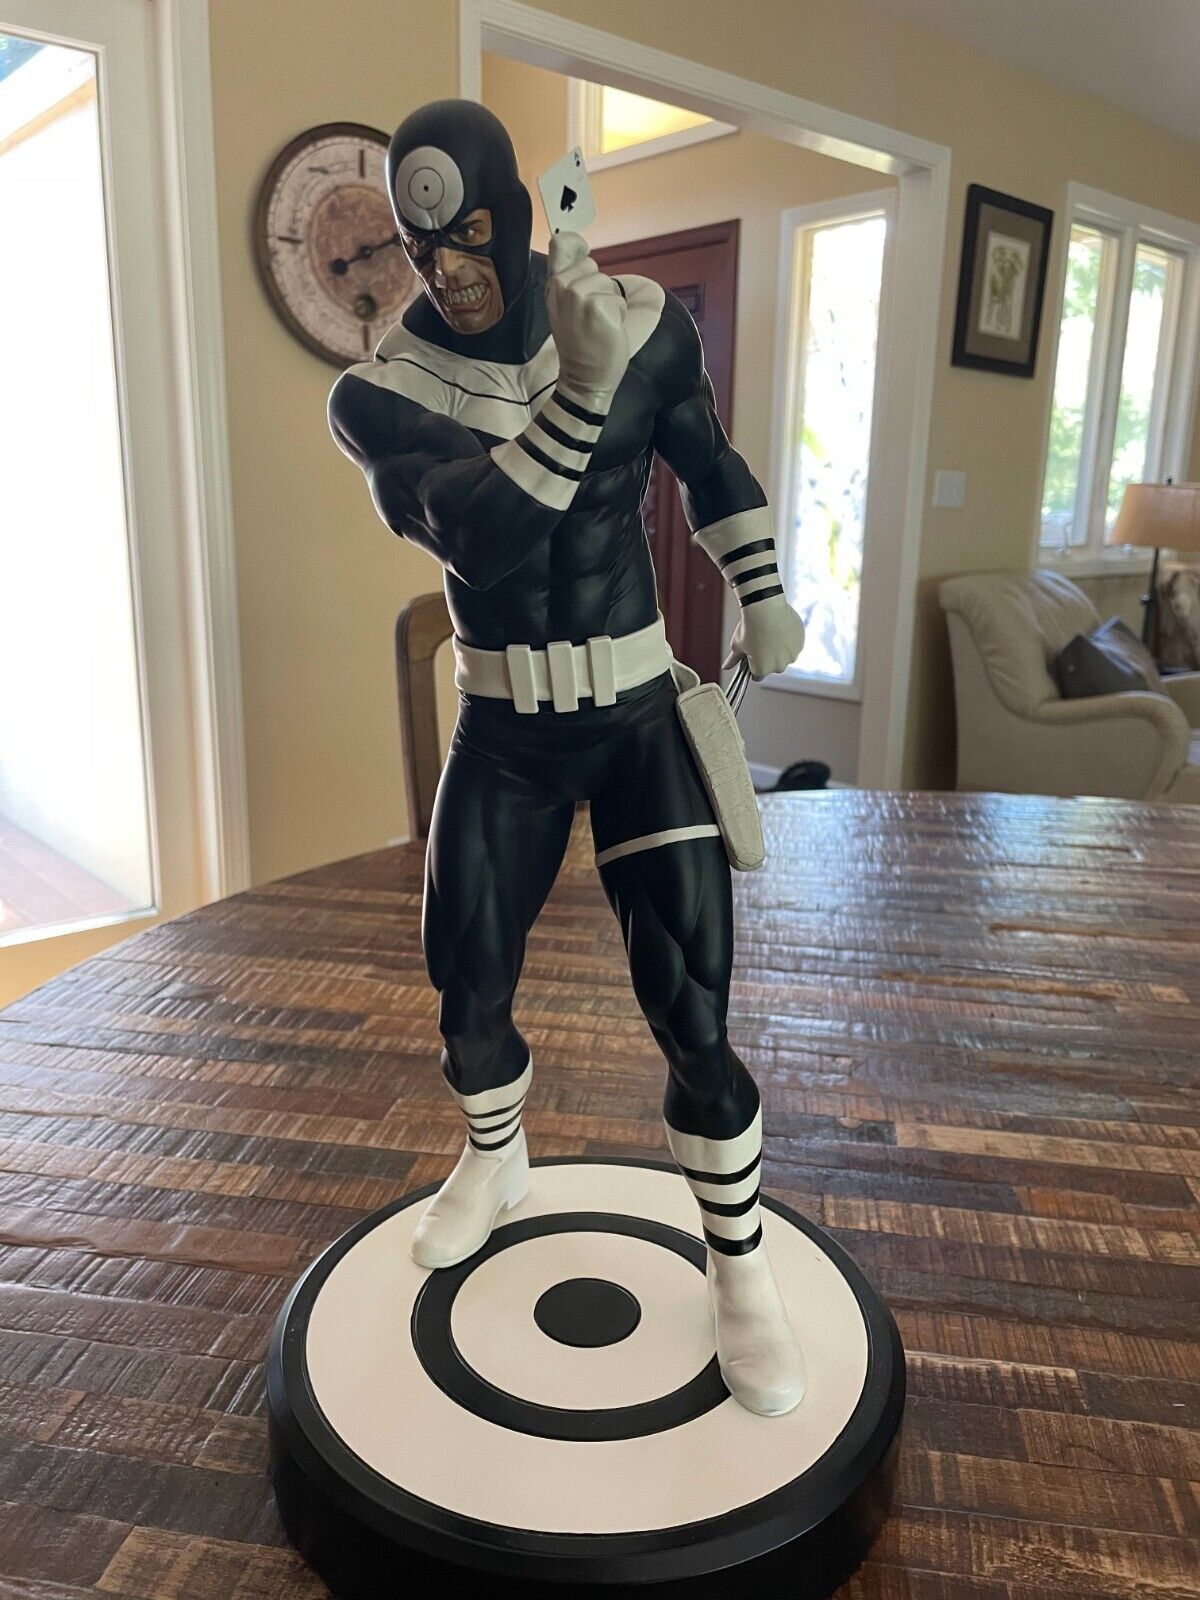 Sideshow Exclusive Bullseye Comiquette Marvel Statue, good condition w/ box